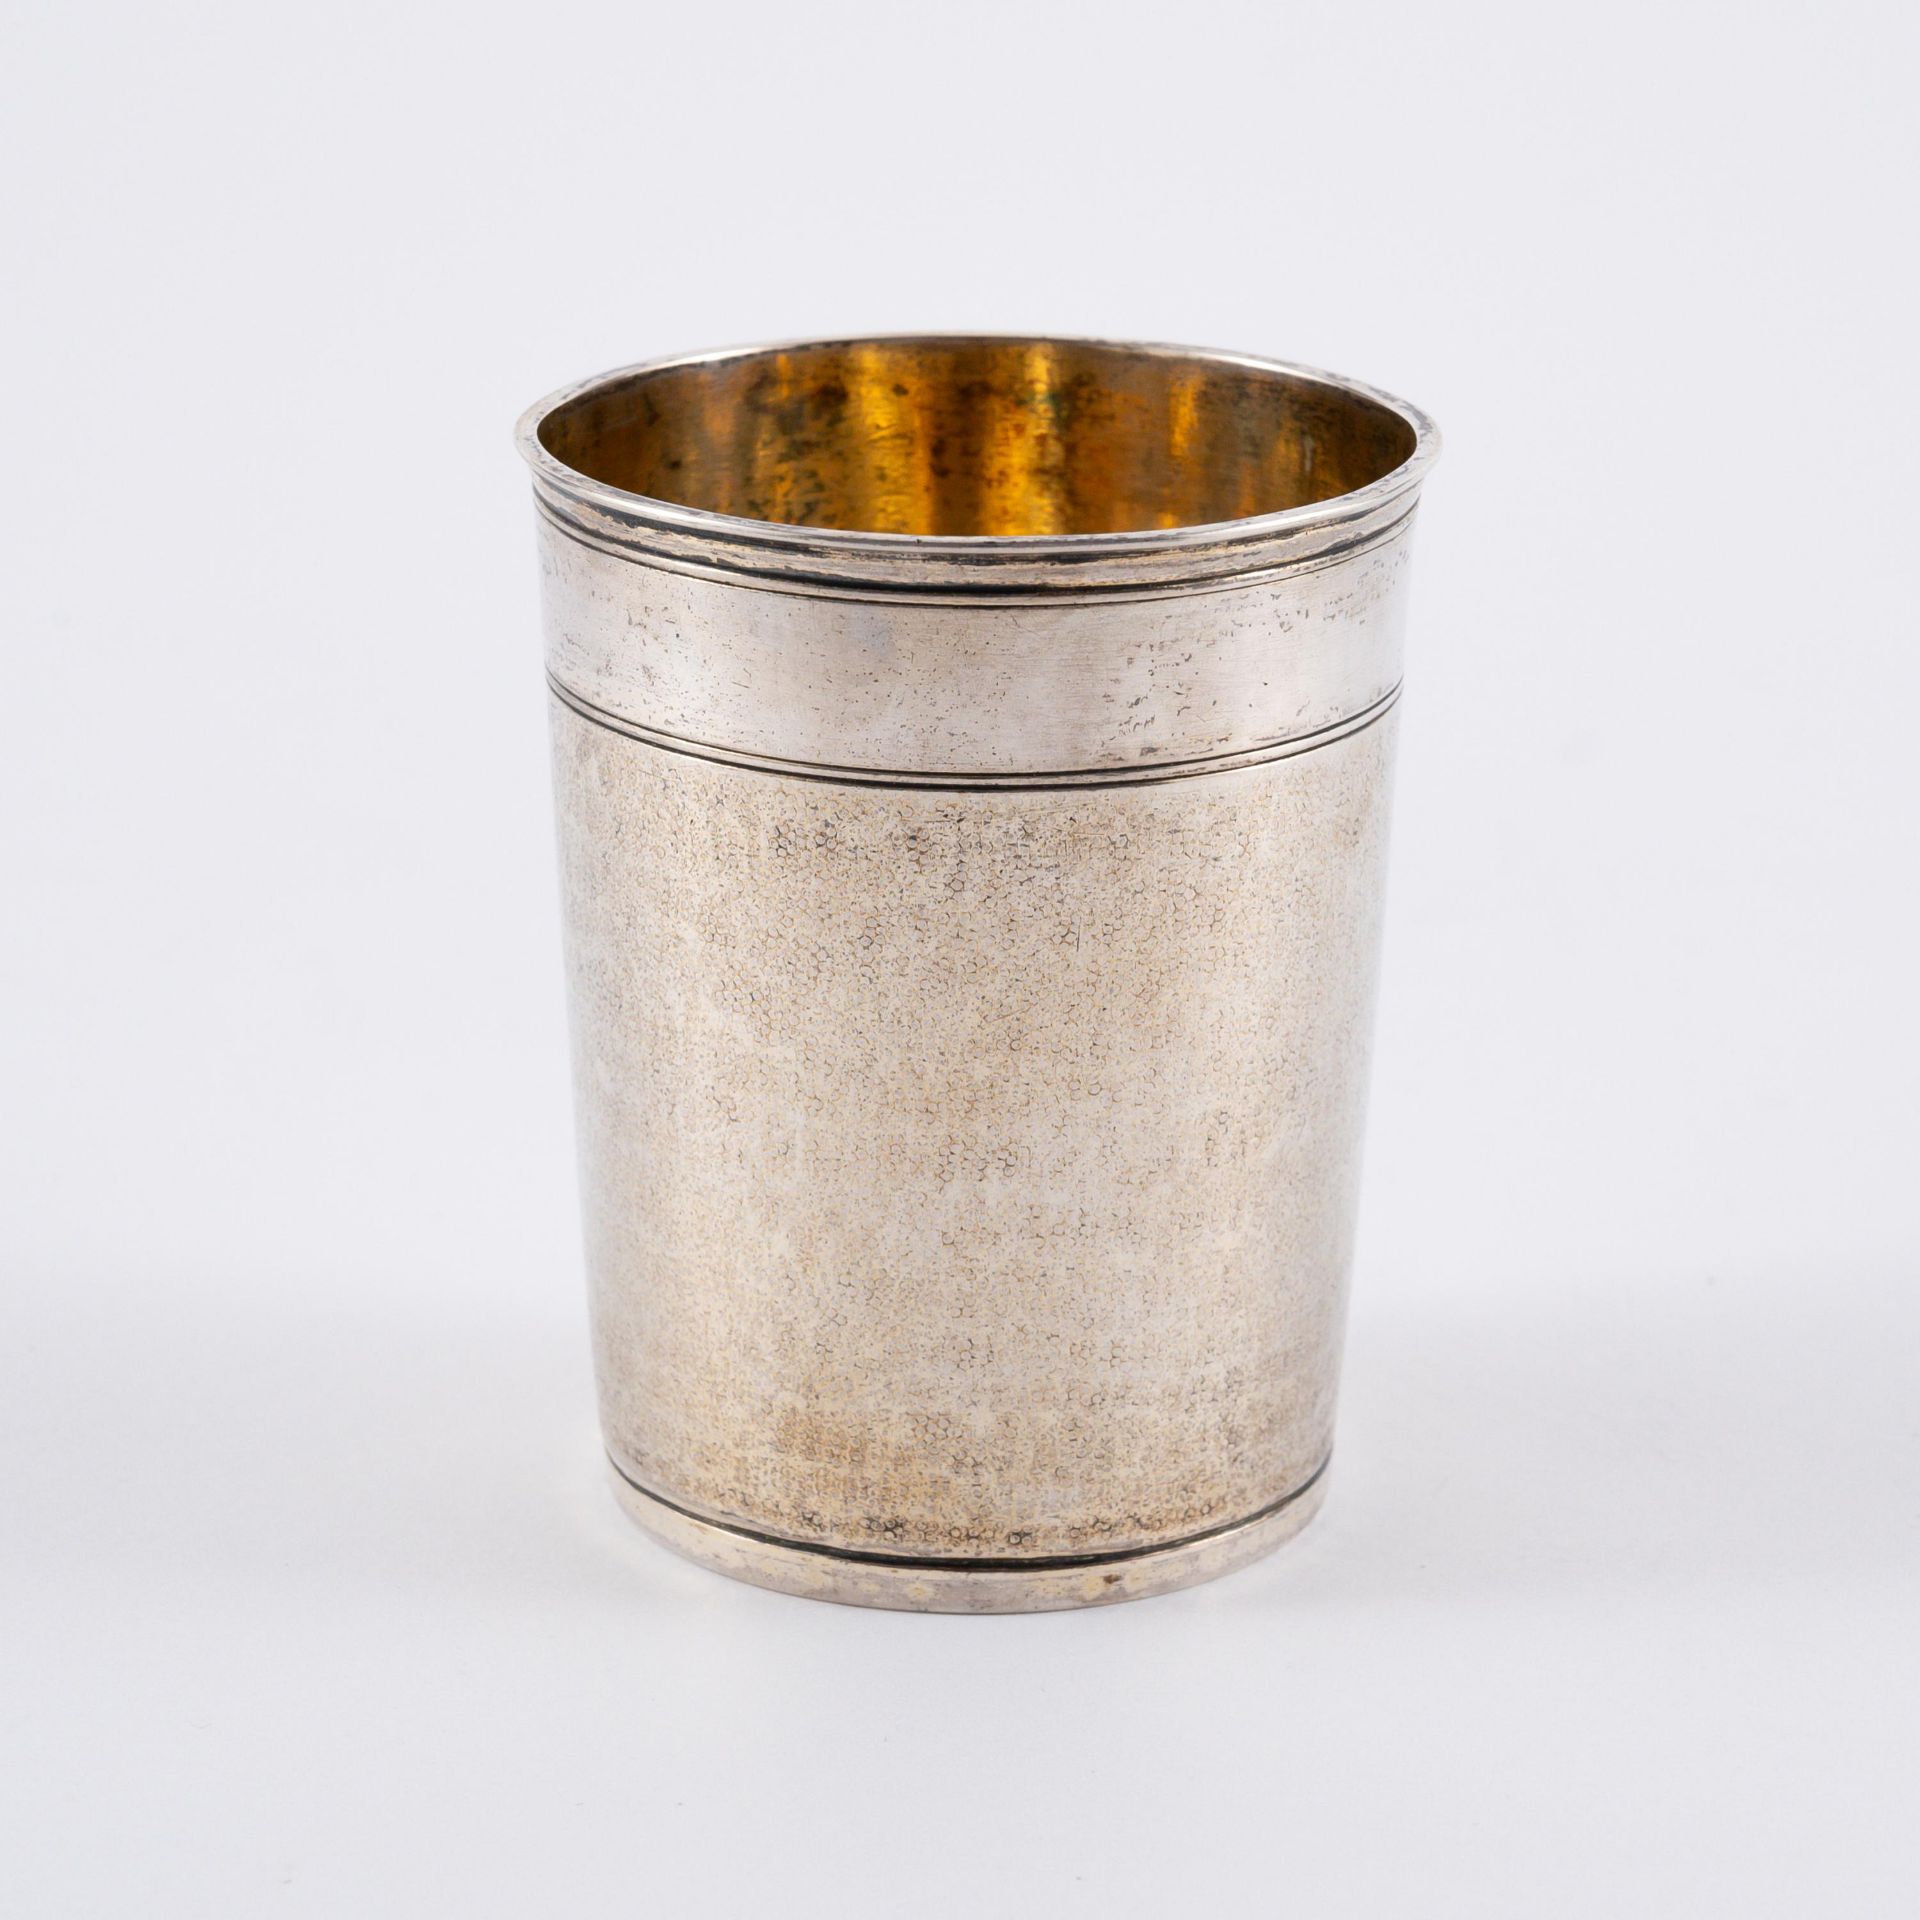 Paul Solanier: SILVER SNAKE SKIN CUP - Image 4 of 6